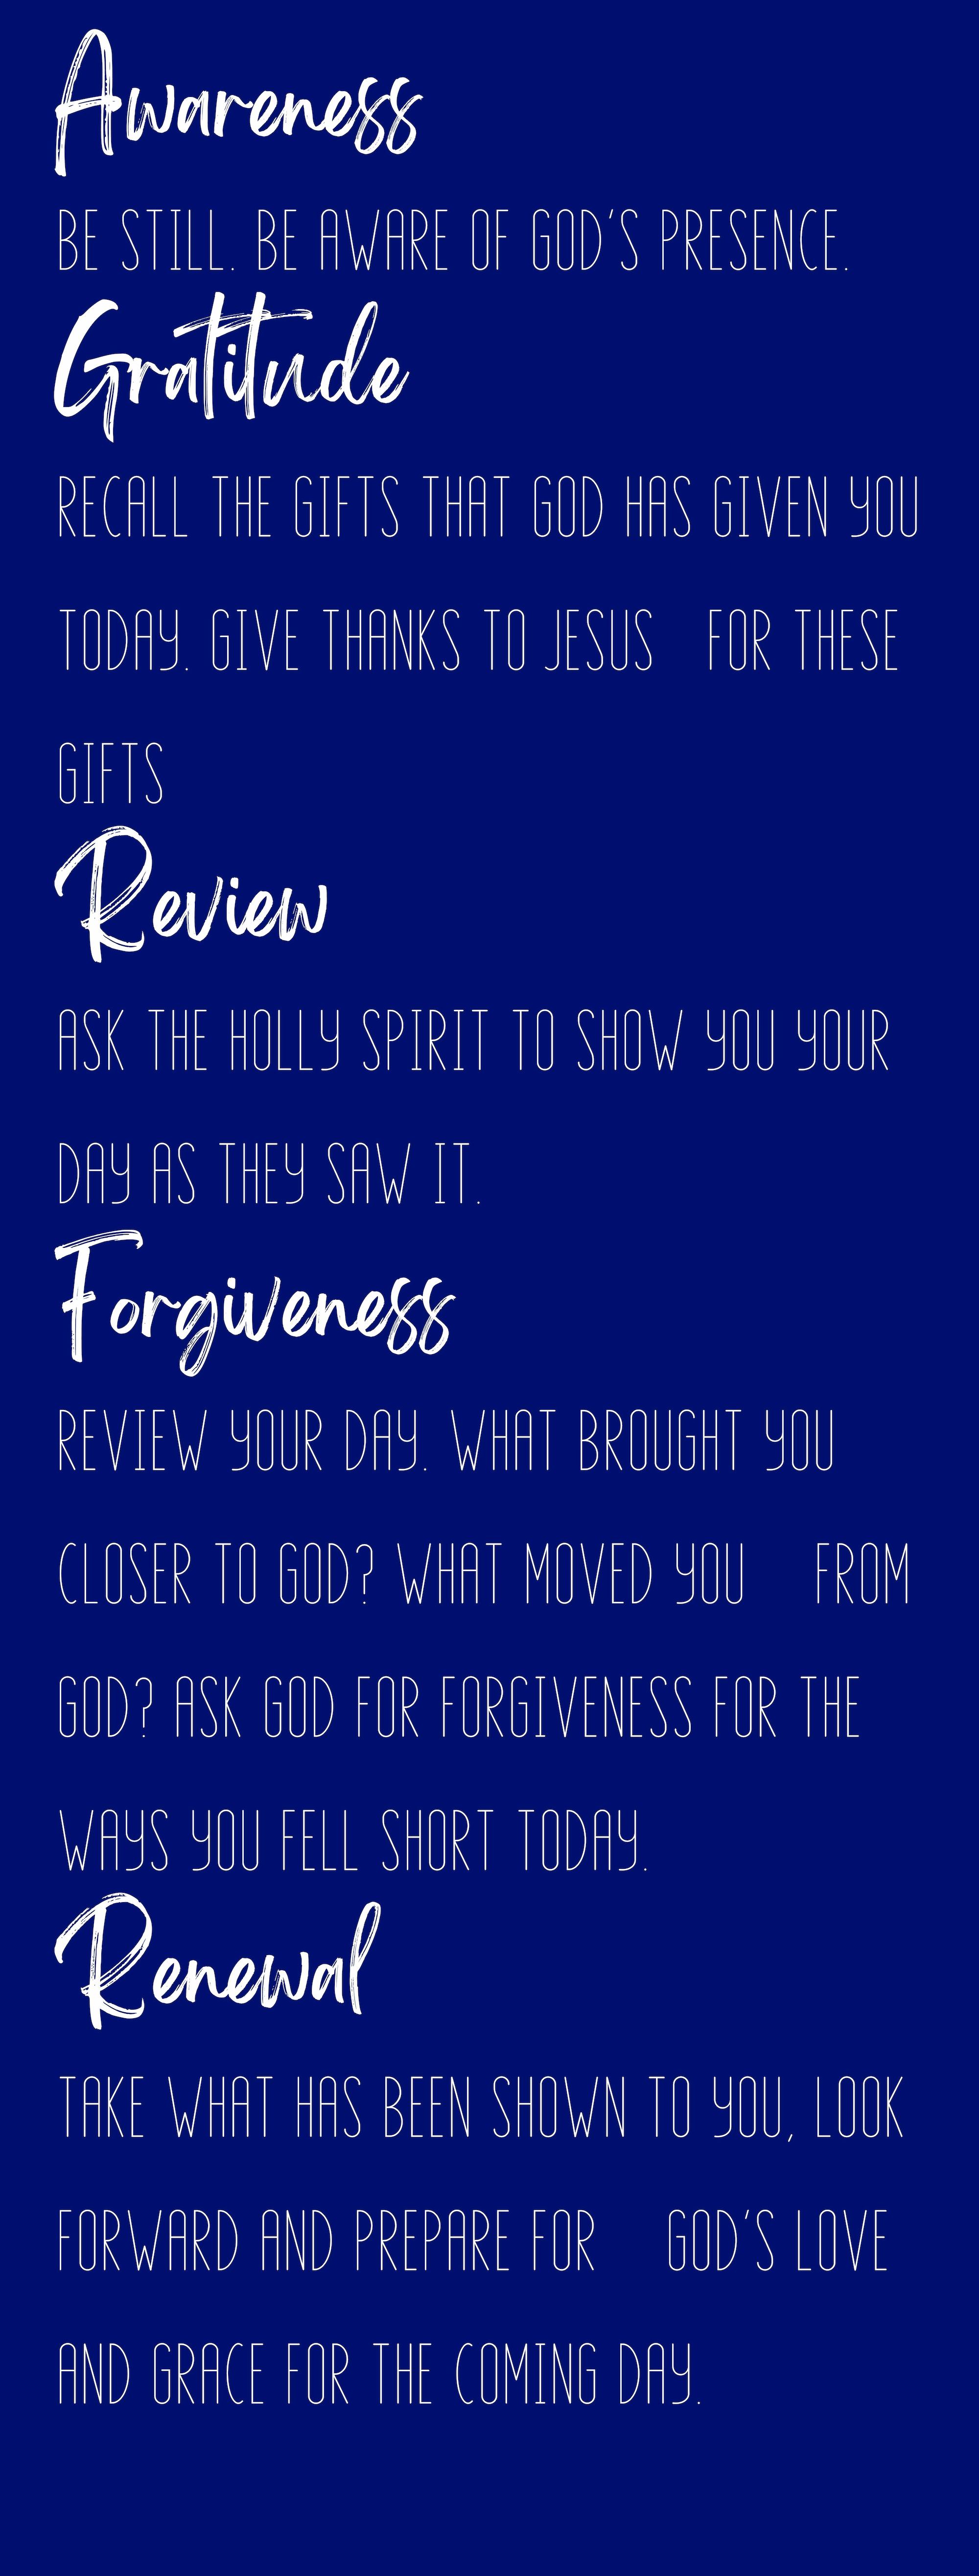 Examen Prayer Example, includes parts about Awareness, Gratitude, Review, Forgiveness, and Renewal.